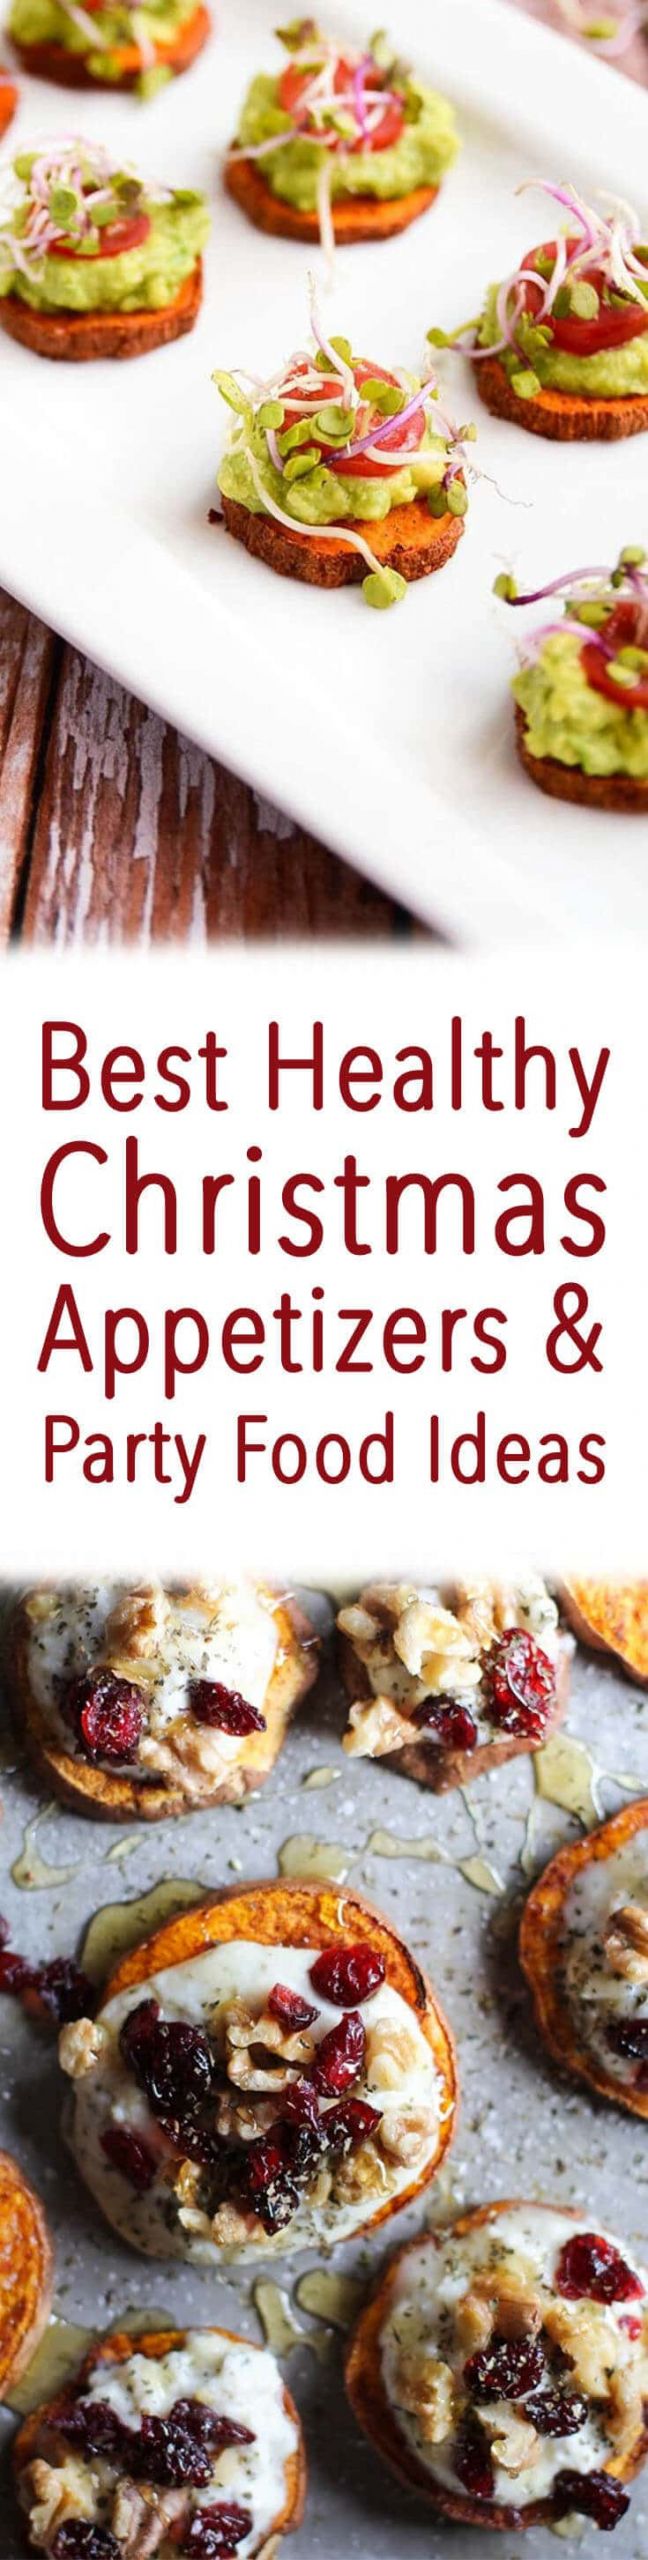 Healthy Christmas Appetizers For Parties
 16 Best Healthy Christmas Appetizers & Party Food Ideas